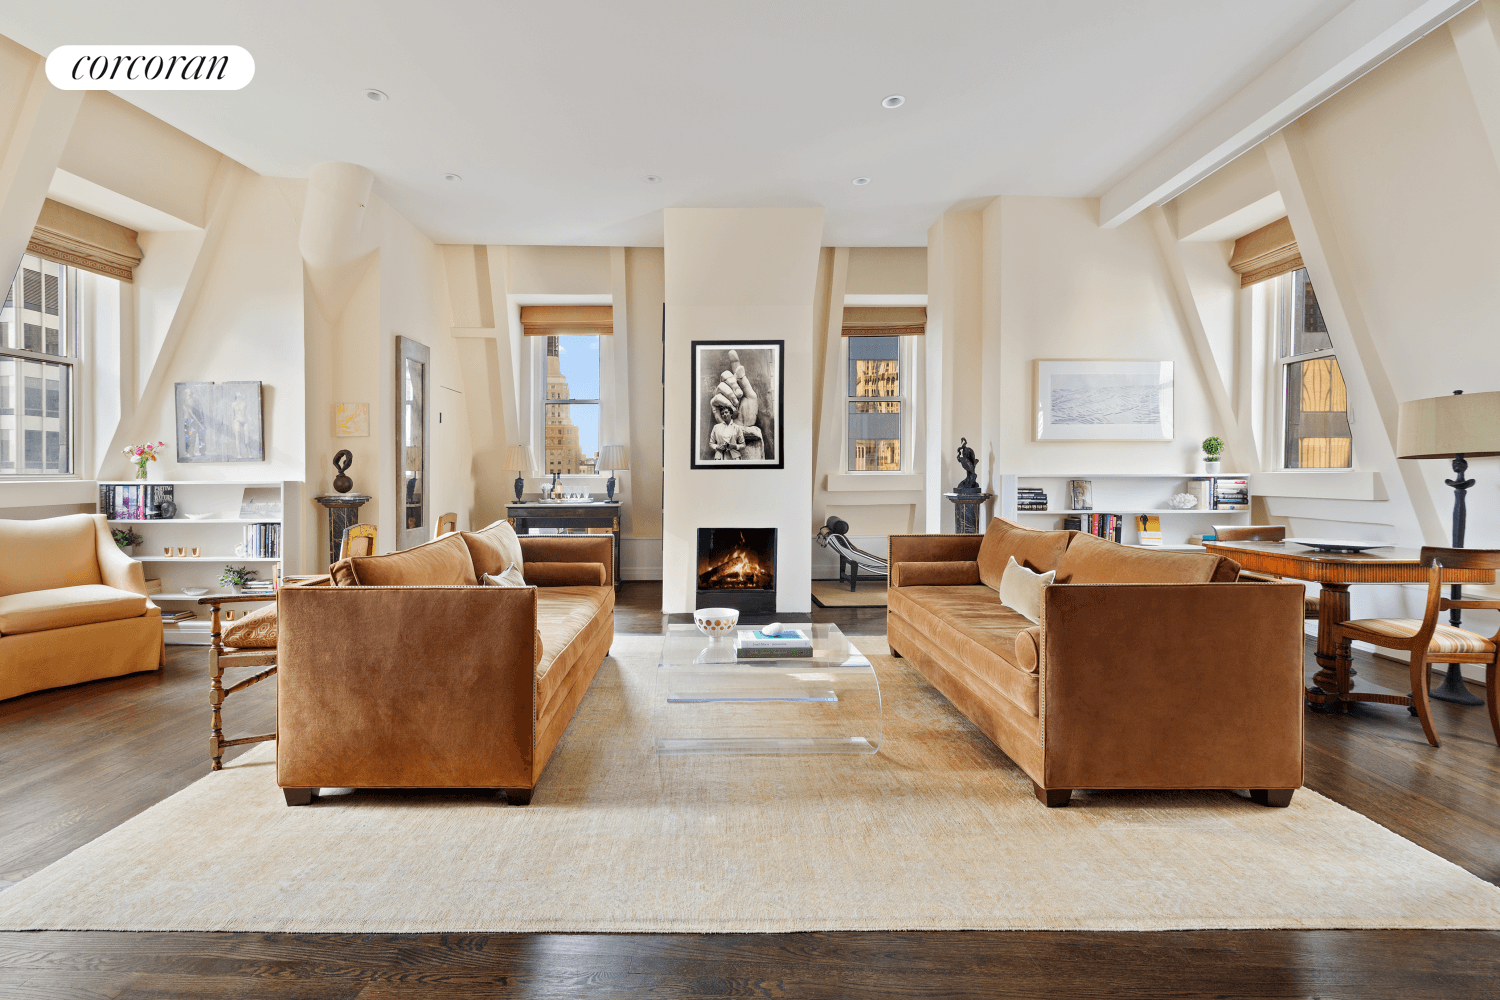 55 Liberty Street, PH 32Extremely private and an entertainer's dream, this 2 bedroom, 1700 sq ft penthouse has unparalleled views and light with 12 windows, 11 foot ceilings and south, ...